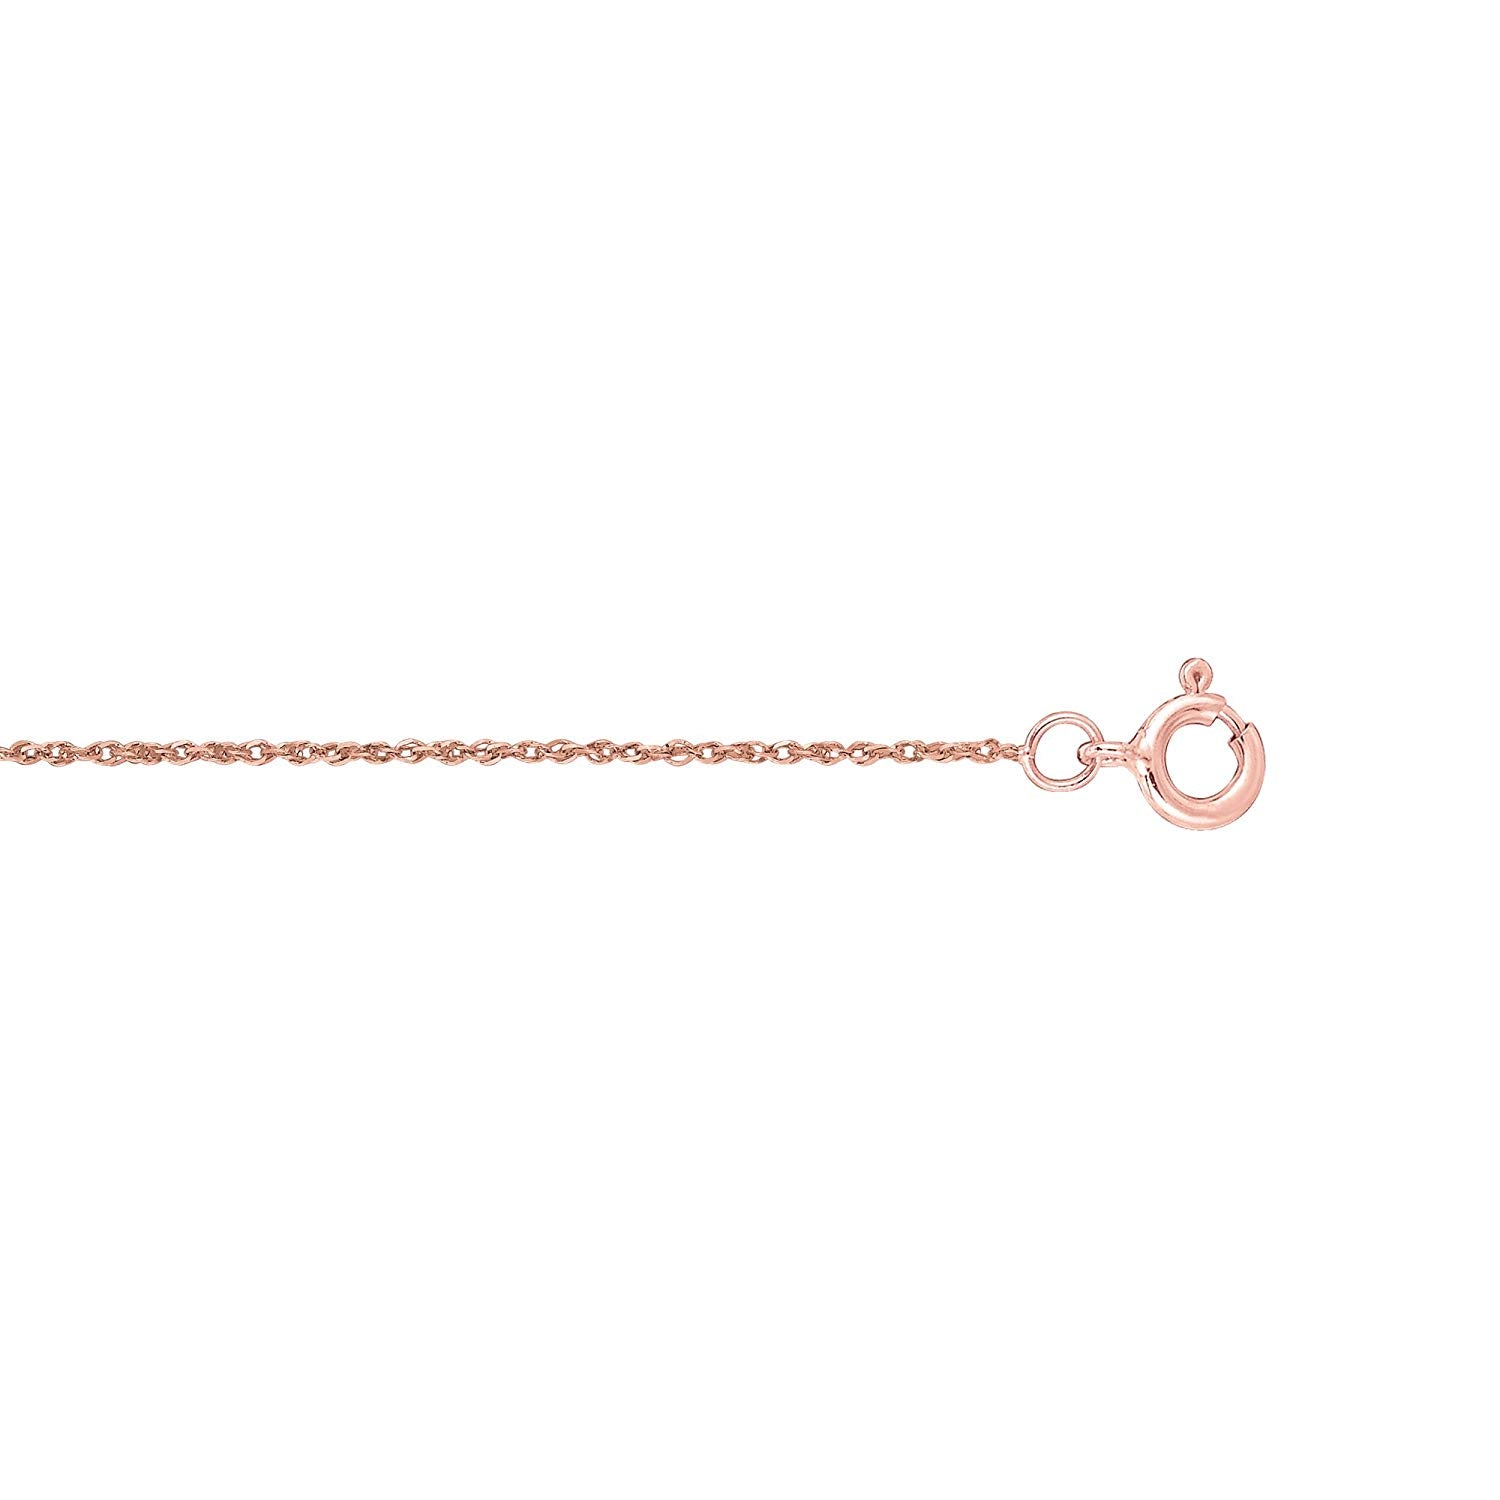 10k Rose Gold Rope Chain Necklace, 0.5mm